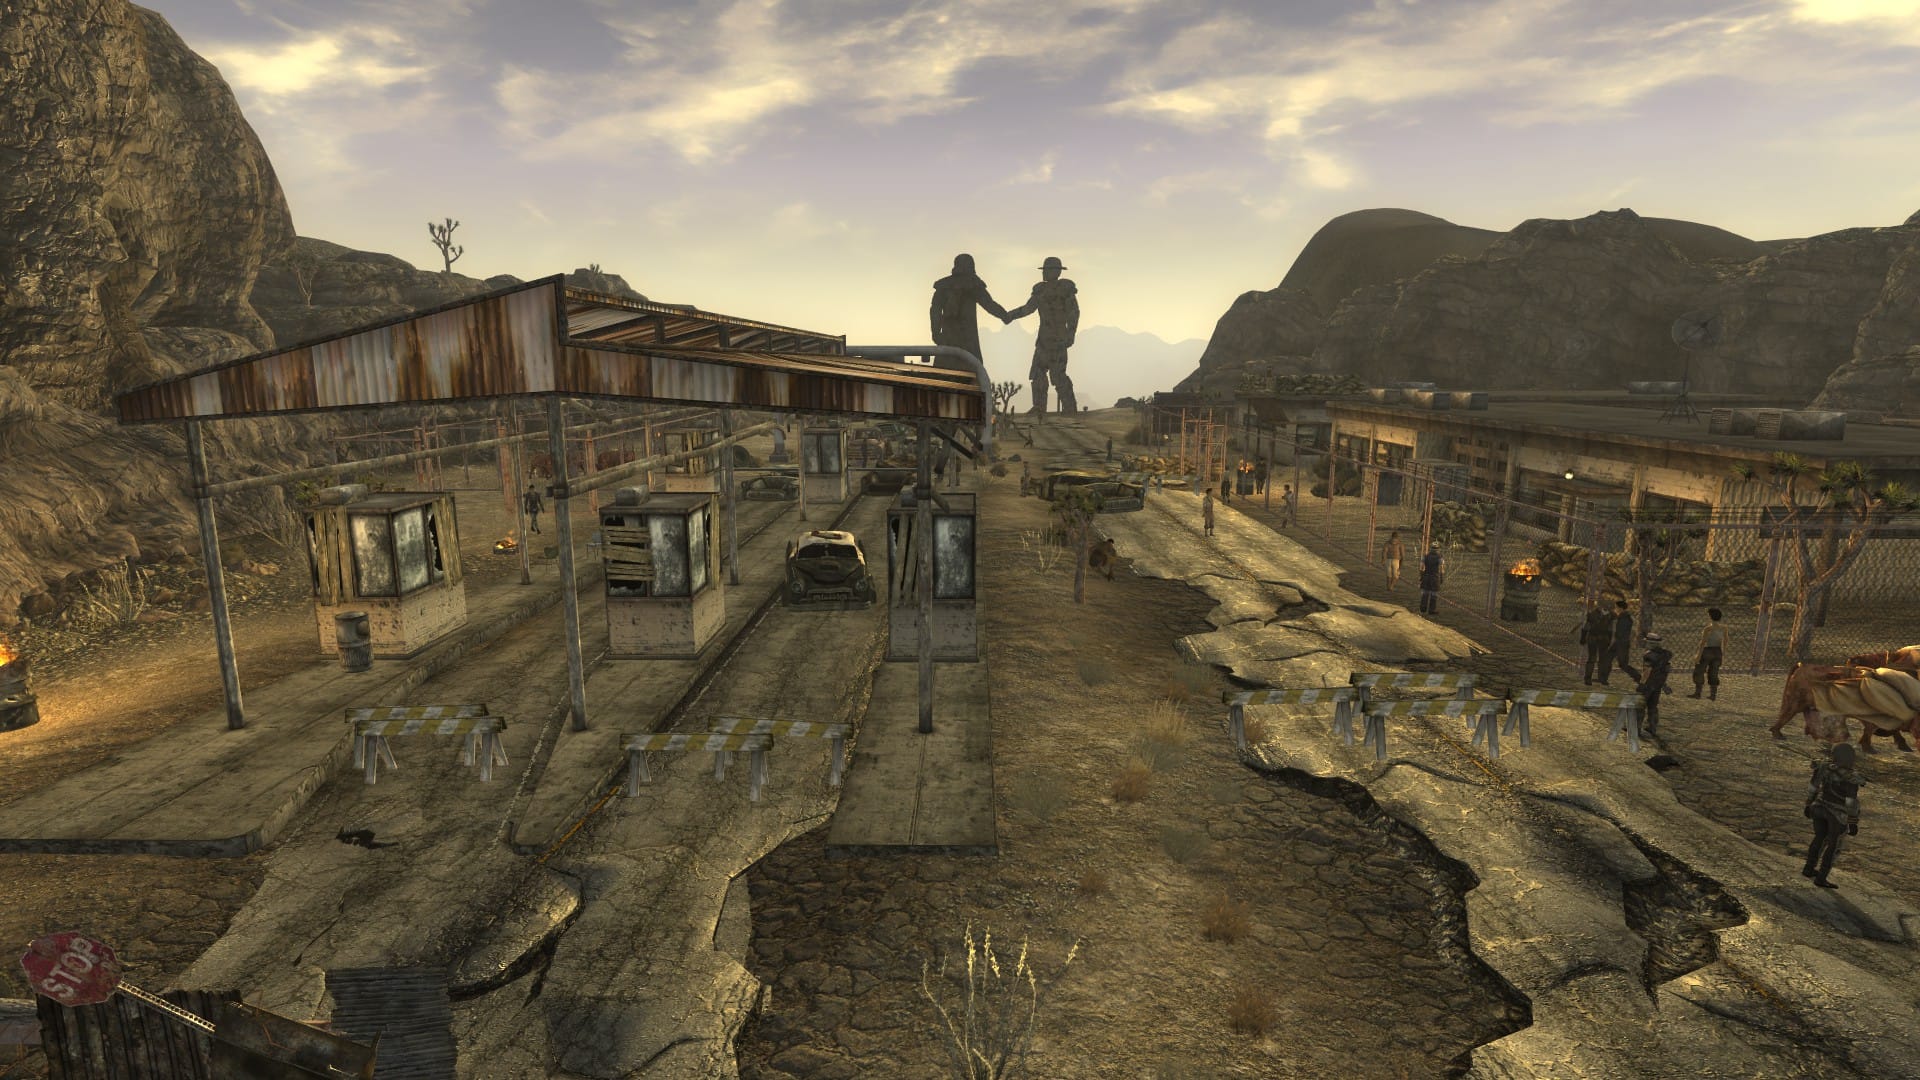 Fallout New Vegas Cut Content Restored In New Mod